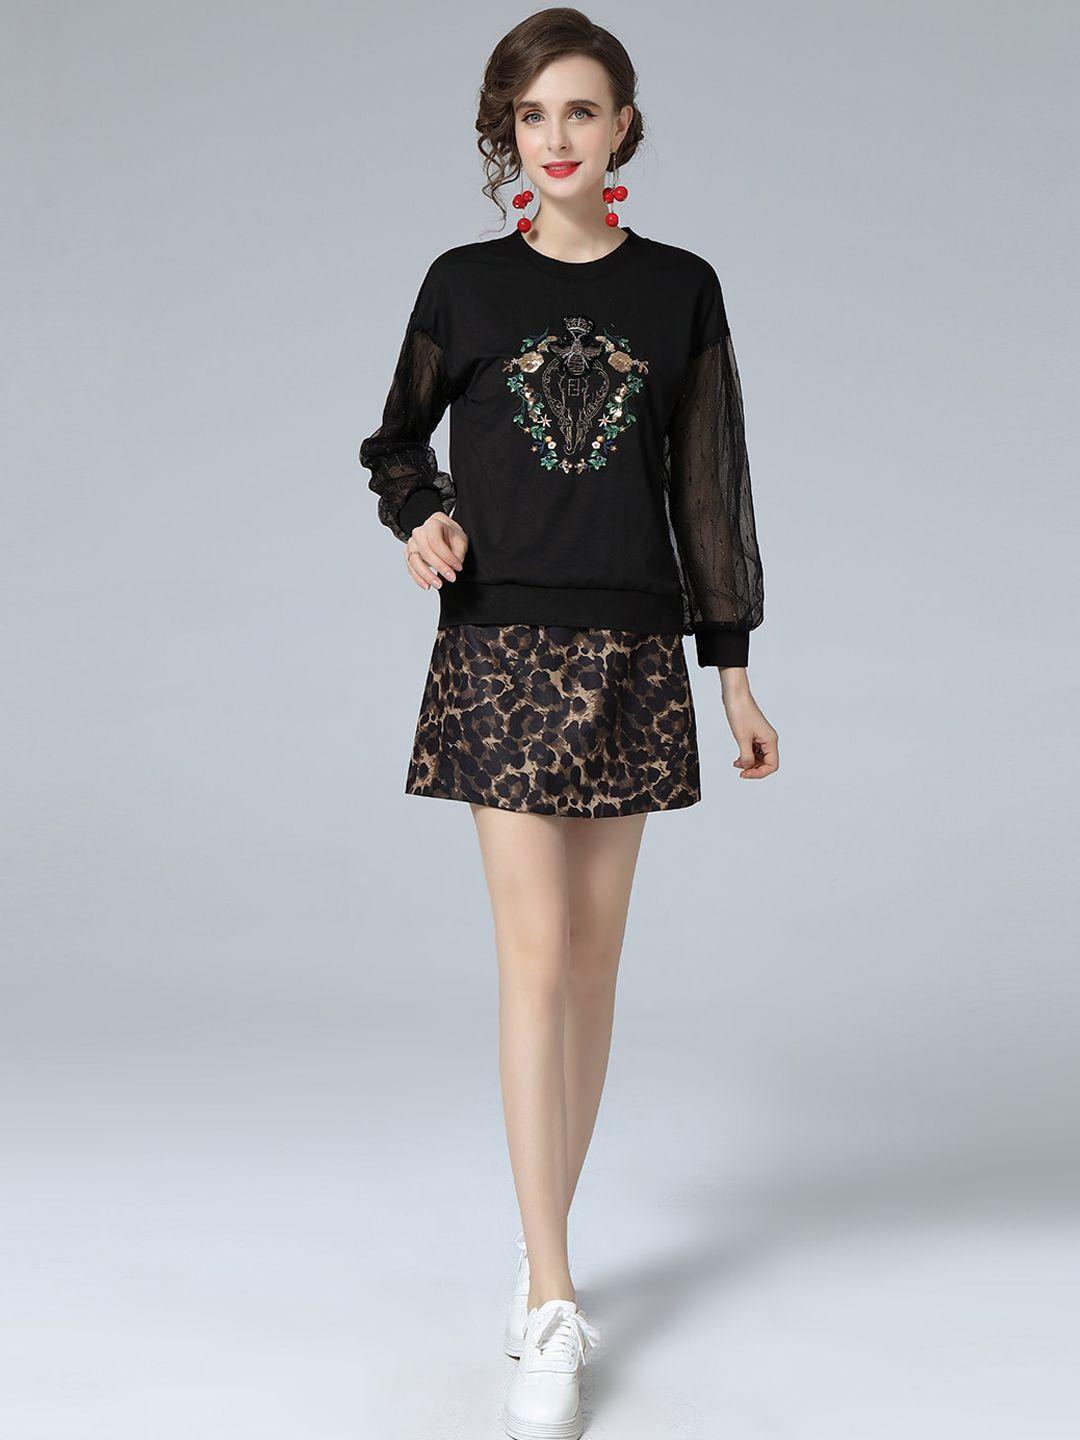 jc collection women black printed co-ords